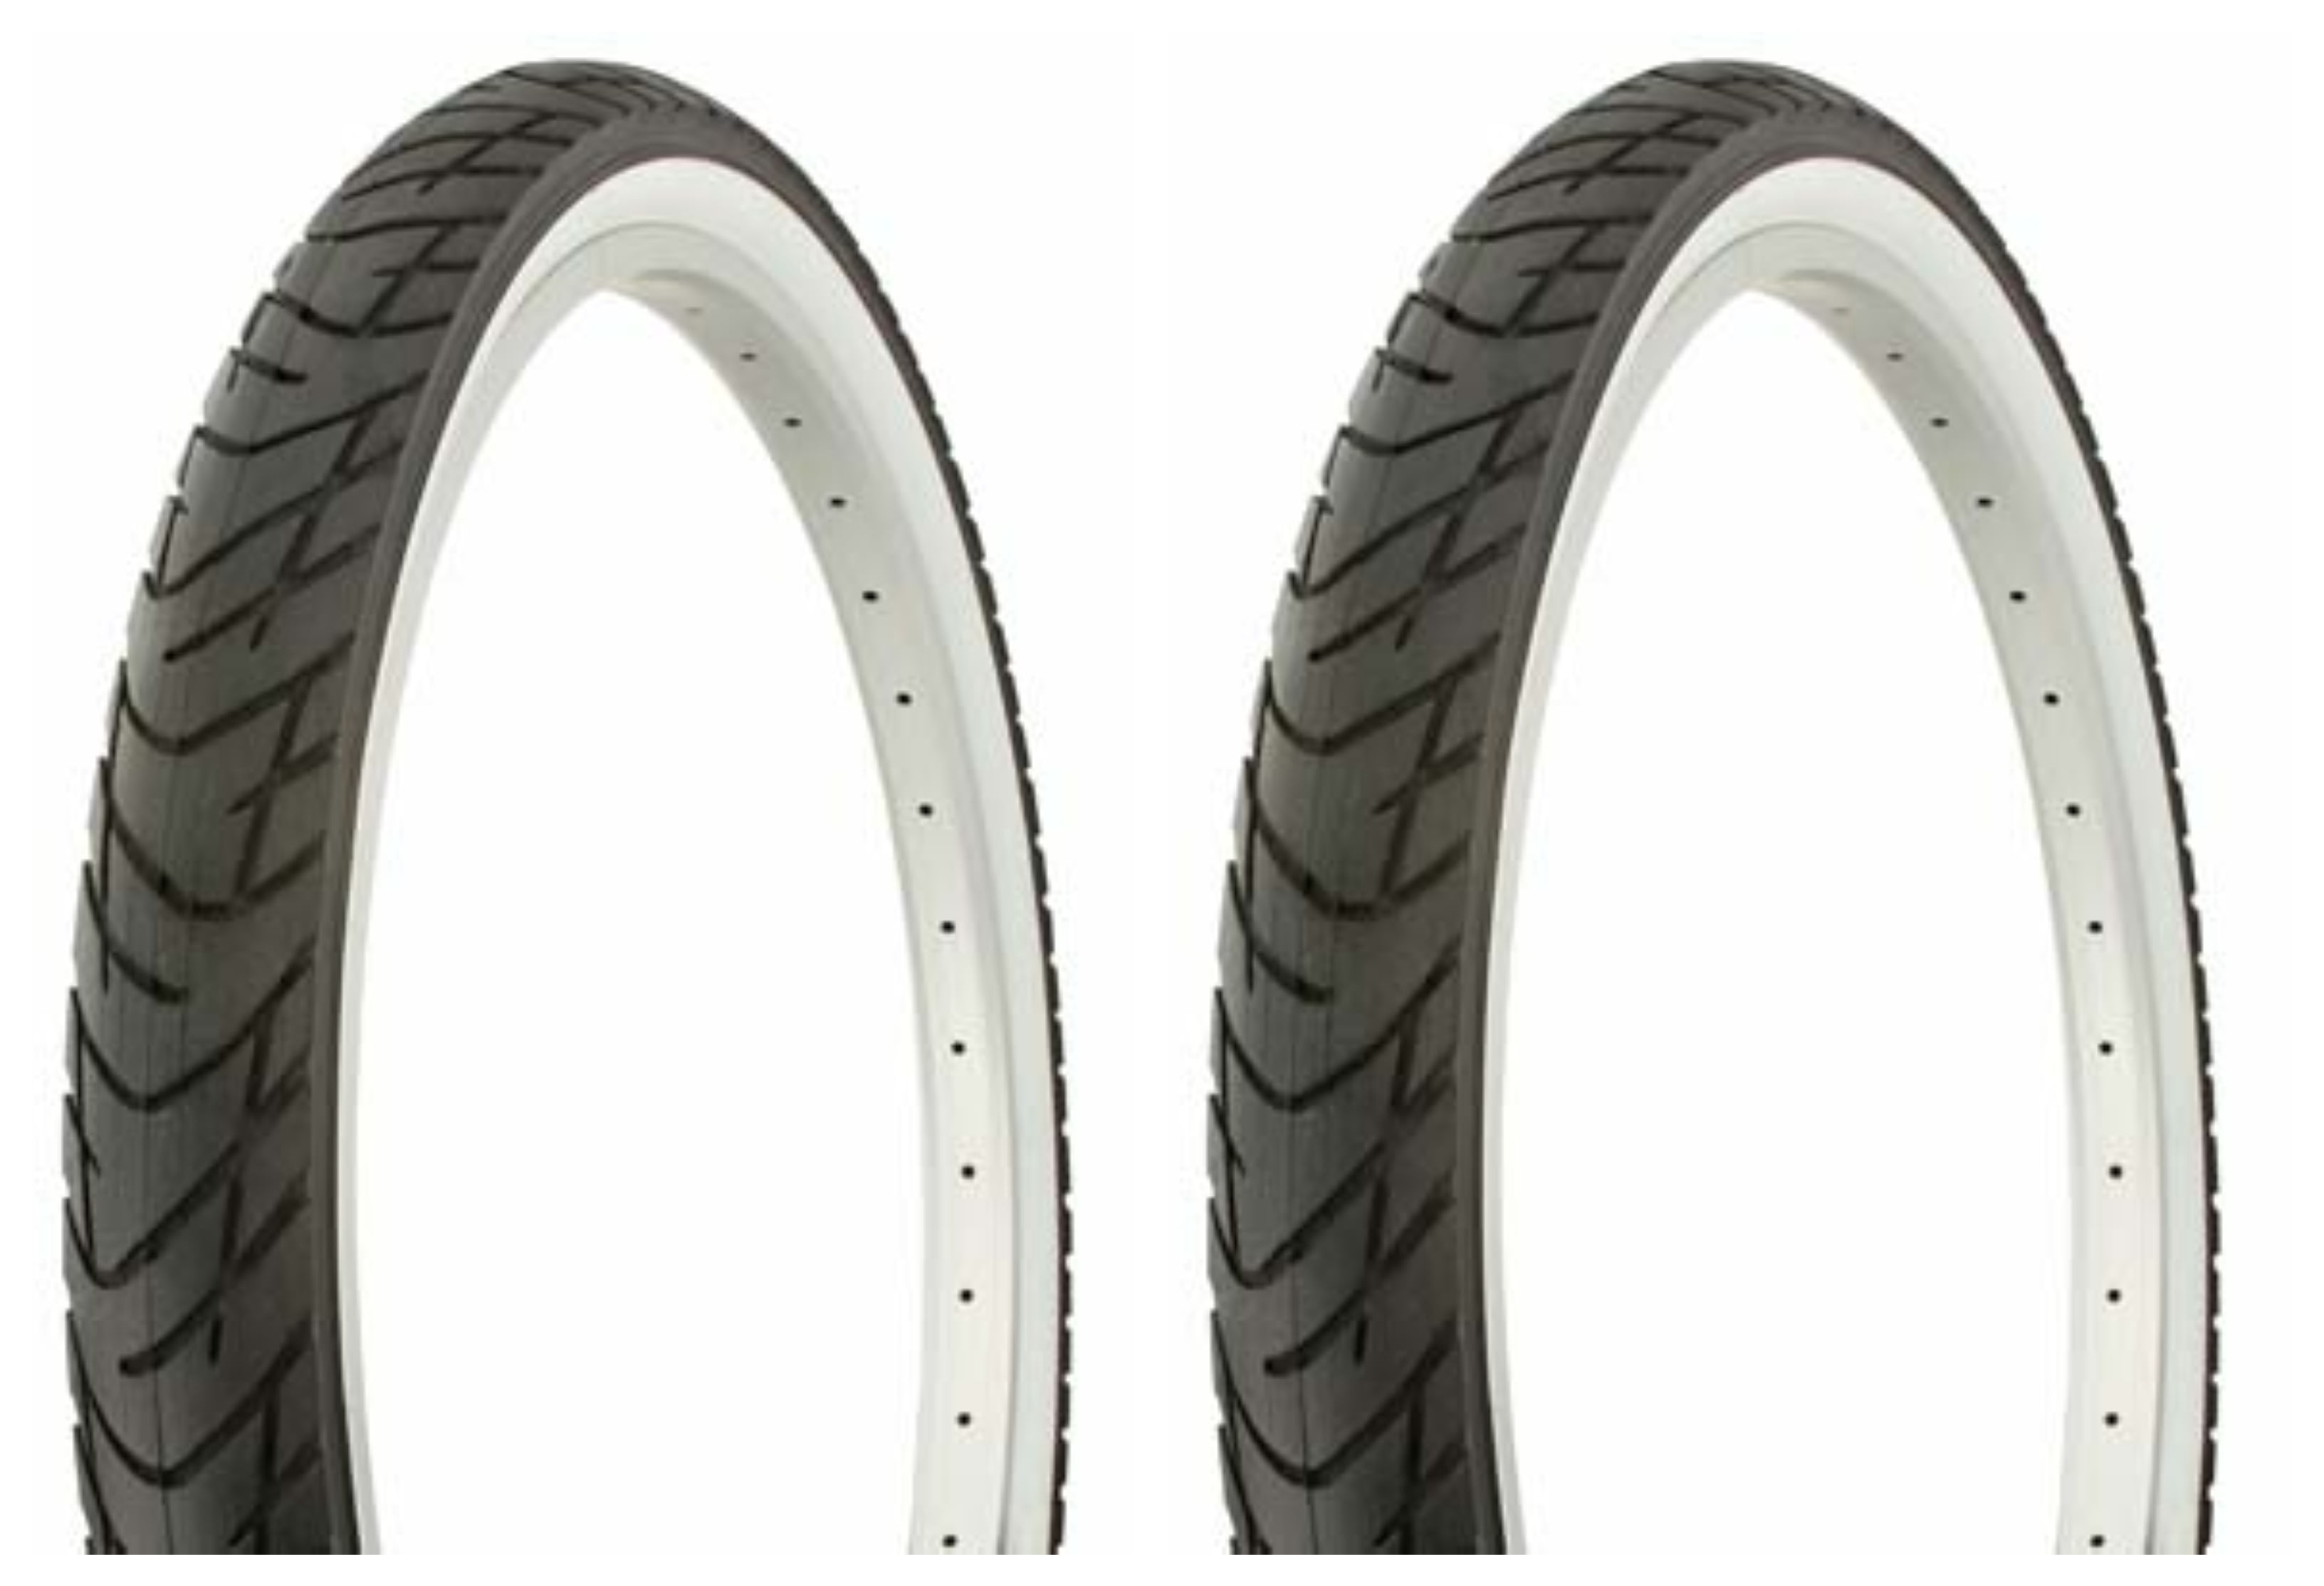 Details about   Motorized Bicycle Motorcycle tread  WhiteWall  tires 26 x 2.125 TUFF BIKE TIRES 